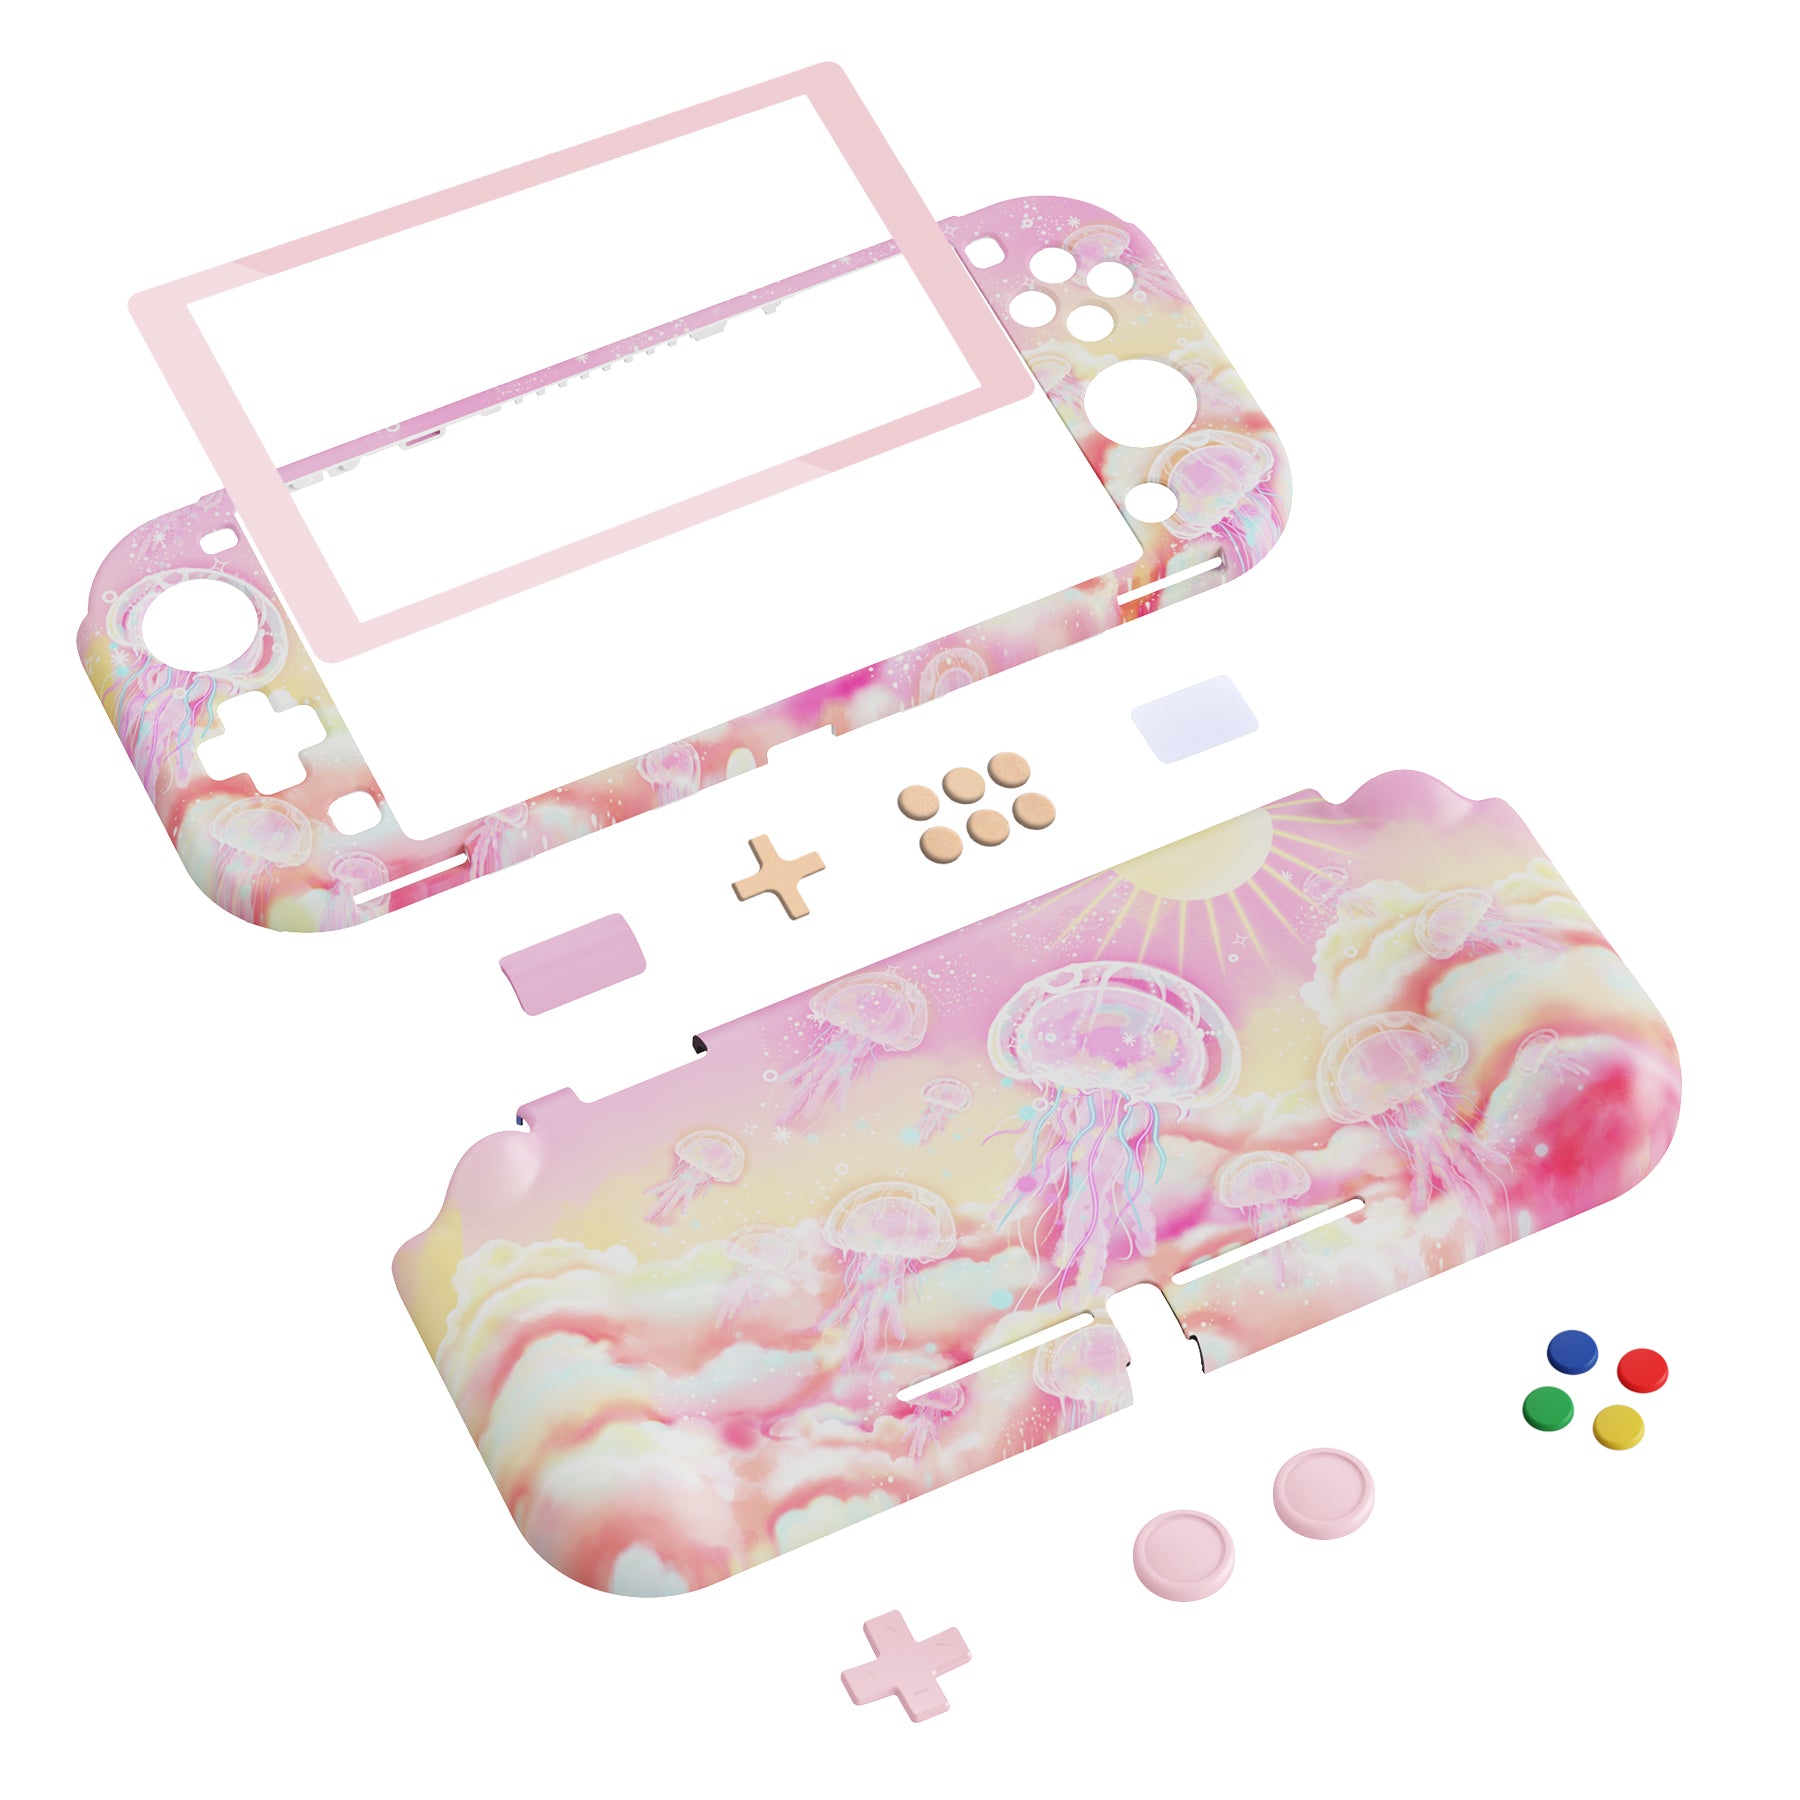 PlayVital ZealProtect Protective Case for Nintendo Switch Lite, Hard Shell Ergonomic Grip Cover for Nintendo Switch Lite w/Screen Protector & Thumb Grip Caps & Button Caps - Pinky Jellyfish Heaven - PSLYR001 playvital